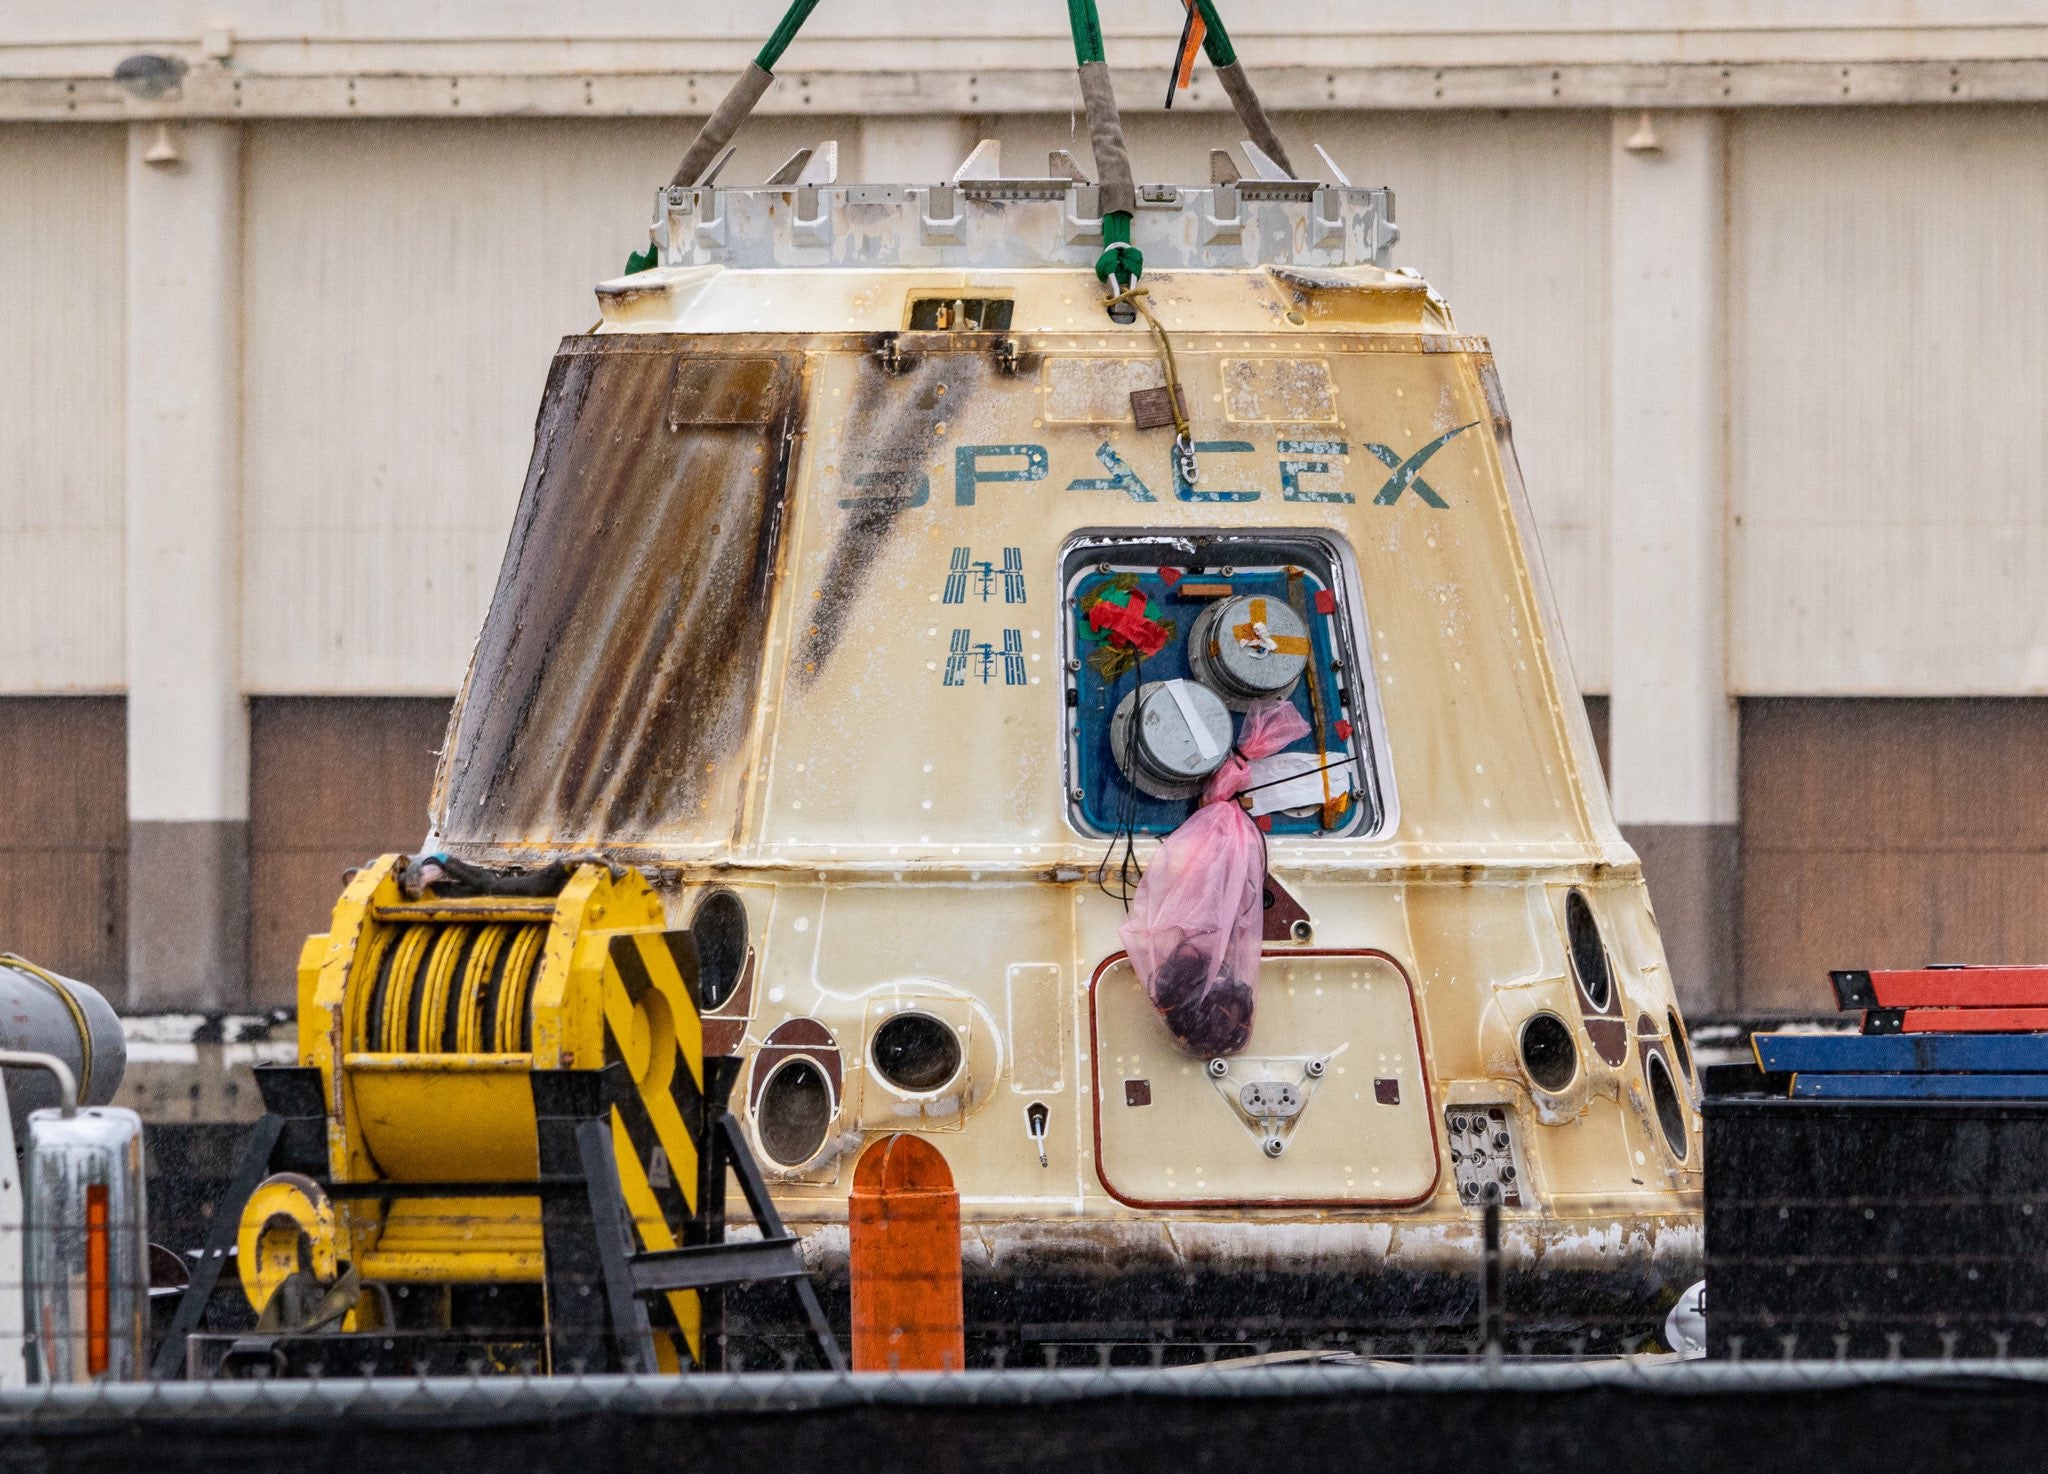 SpaceX retires first iteration of the Dragon spacecraft after ocean recovery